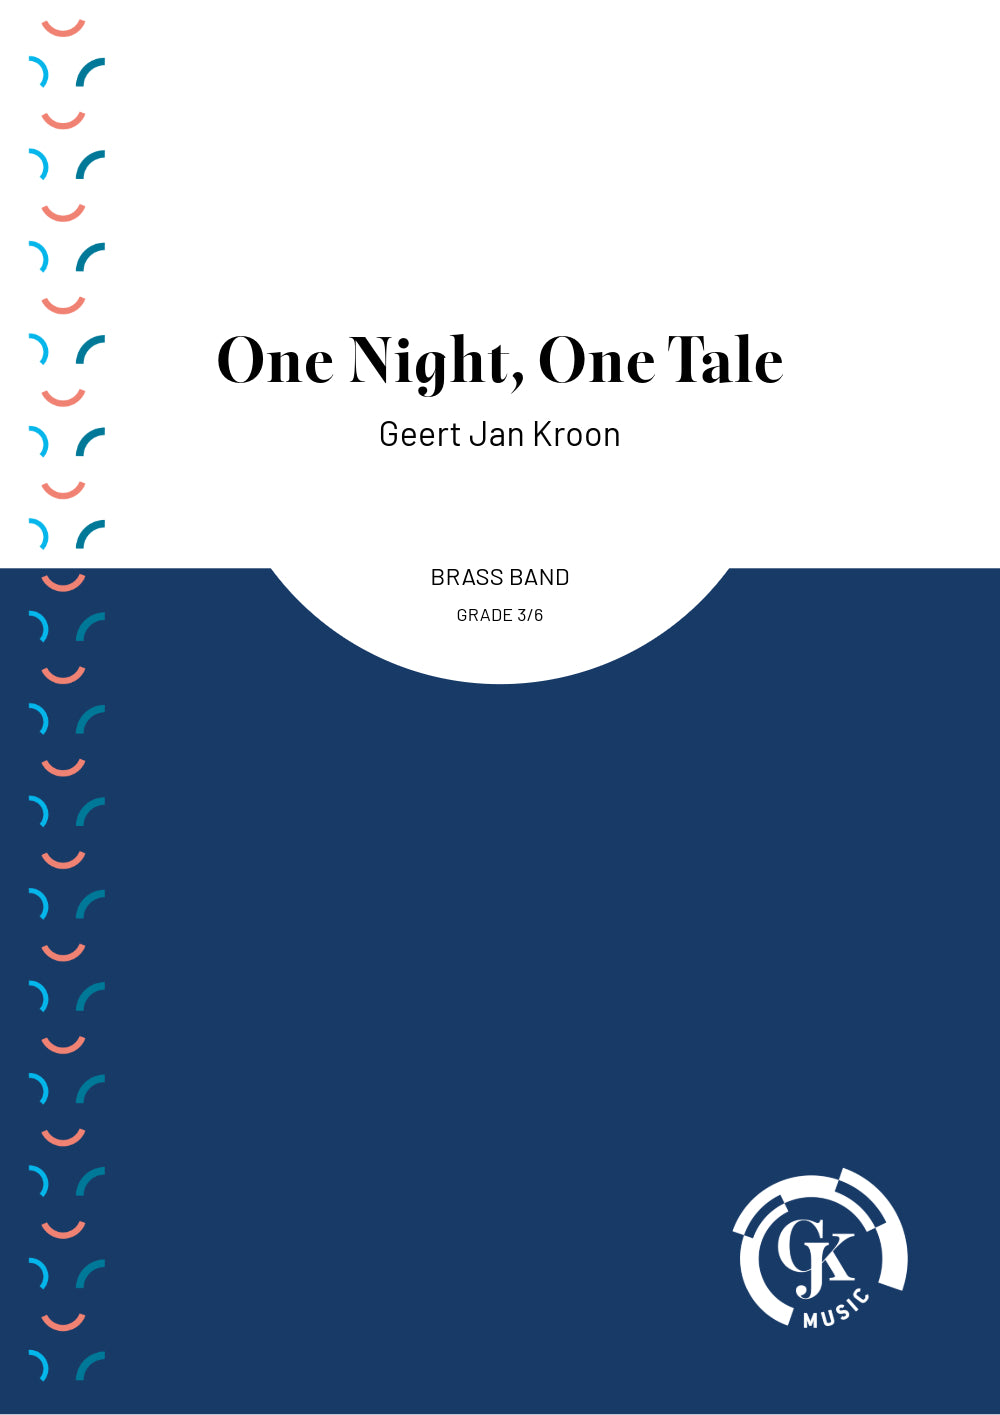 One Night, One Tale - Brass Band & Tenor Horn